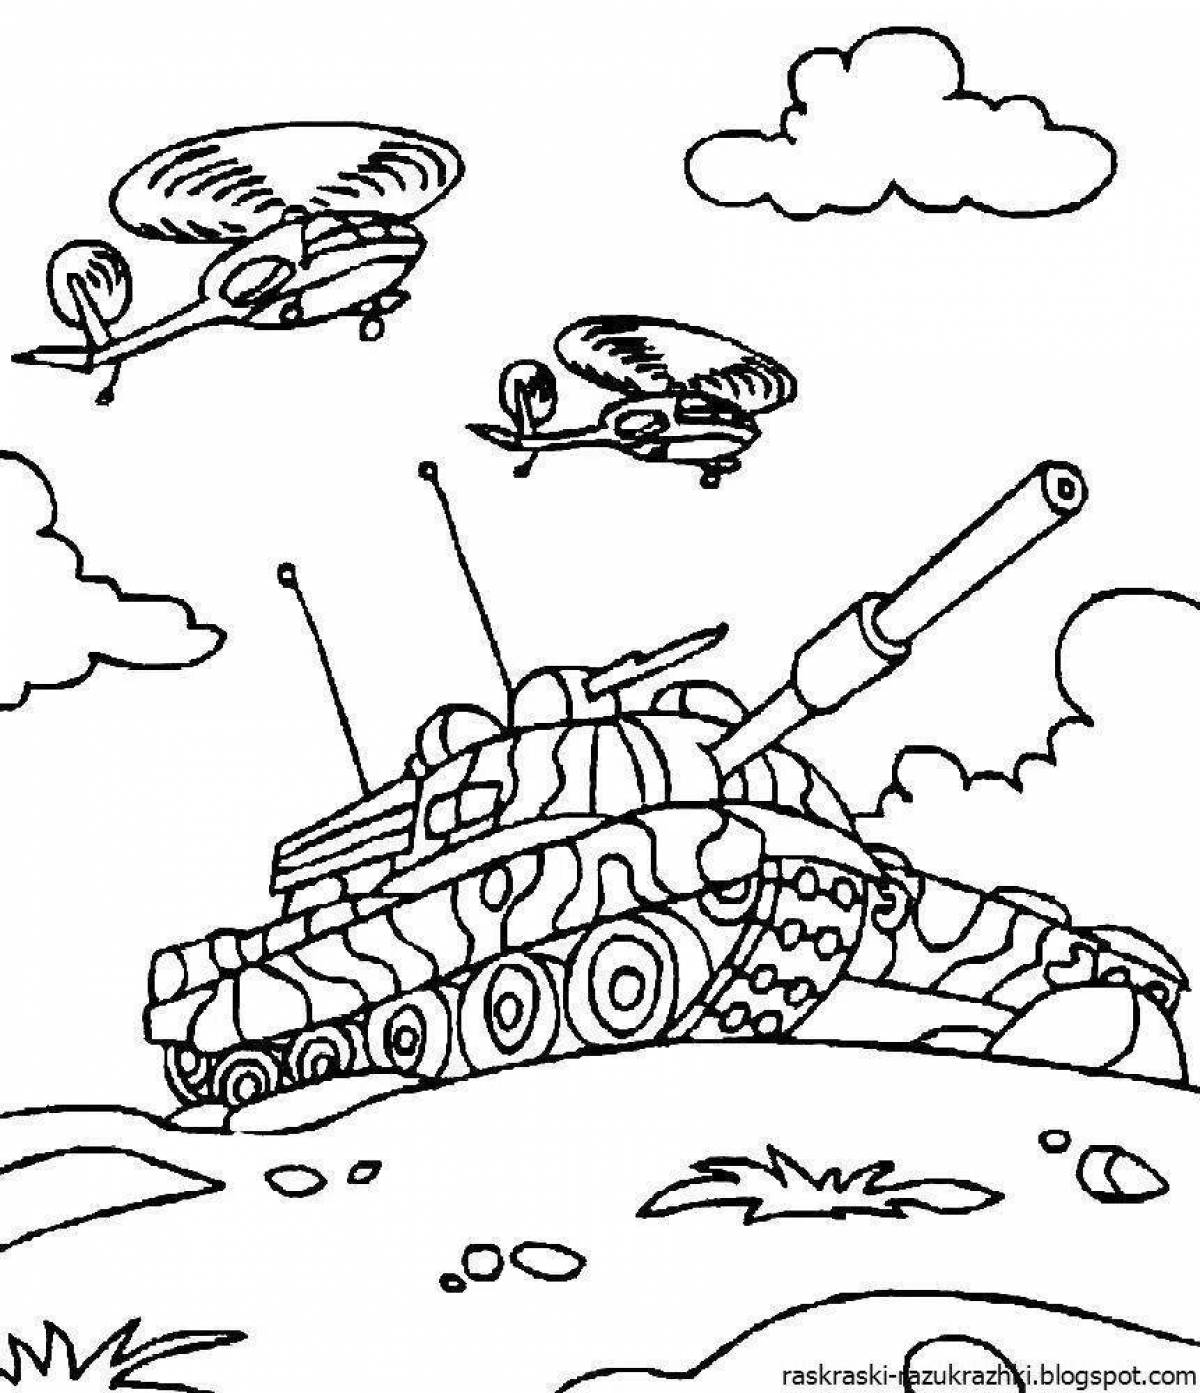 Adventure war coloring book for 6-7 year olds